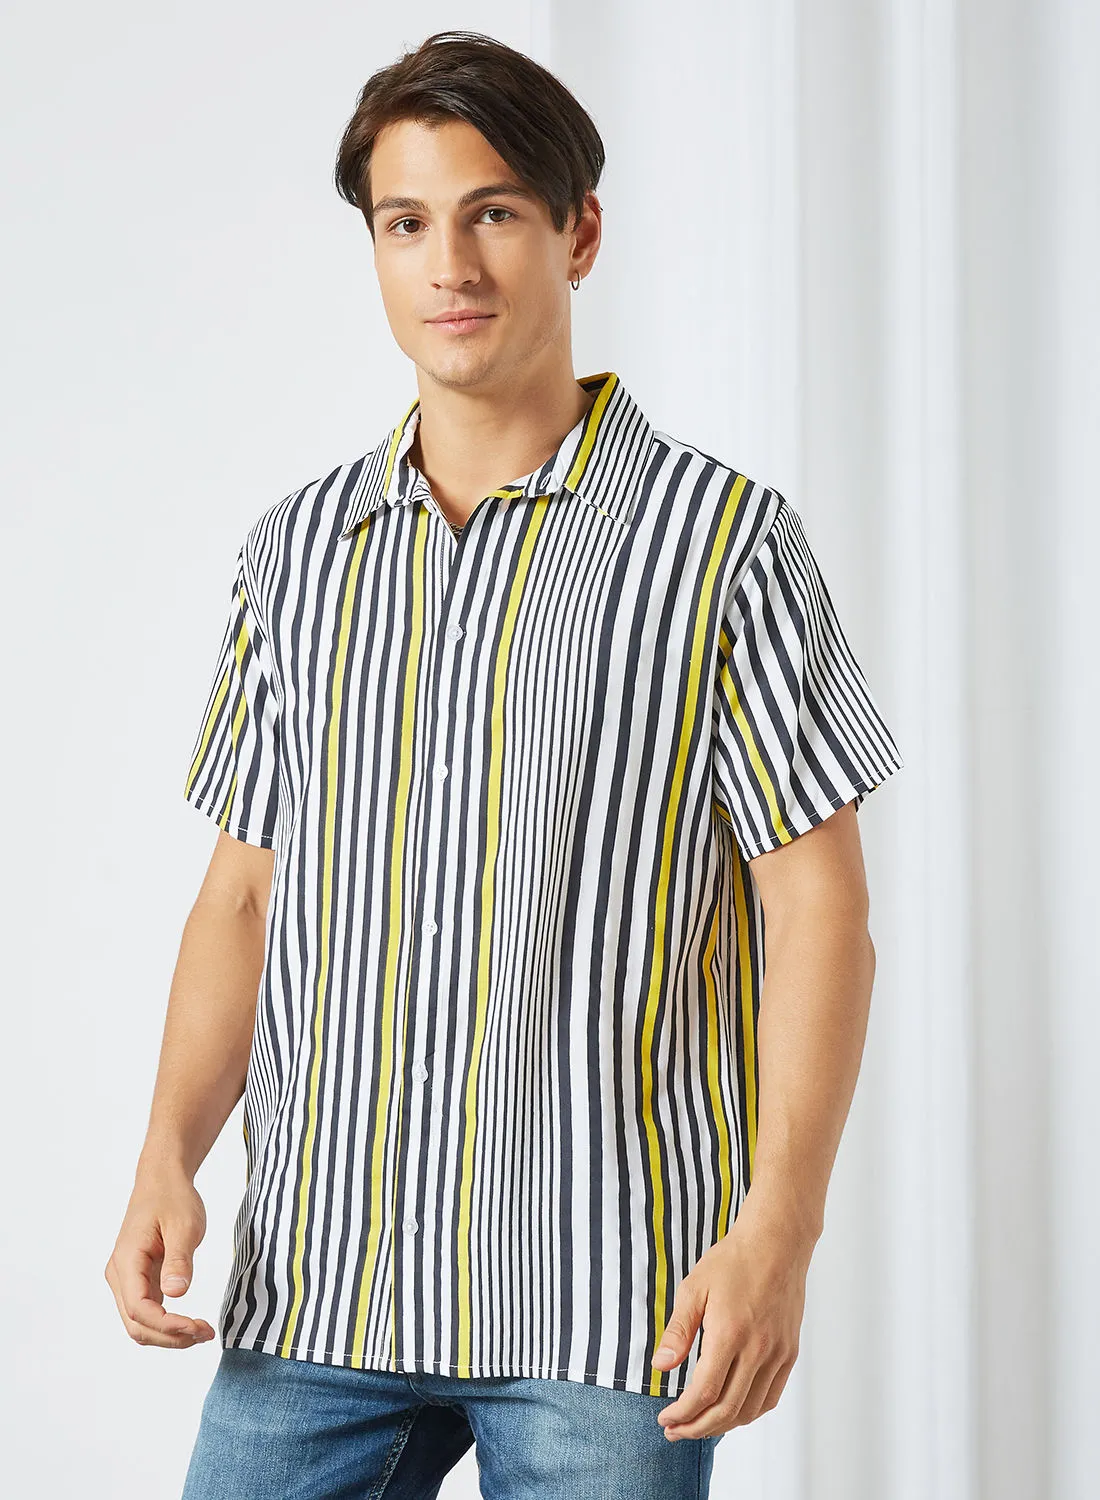 STATE 8 Striped Short Sleeve Shirt Multicolour